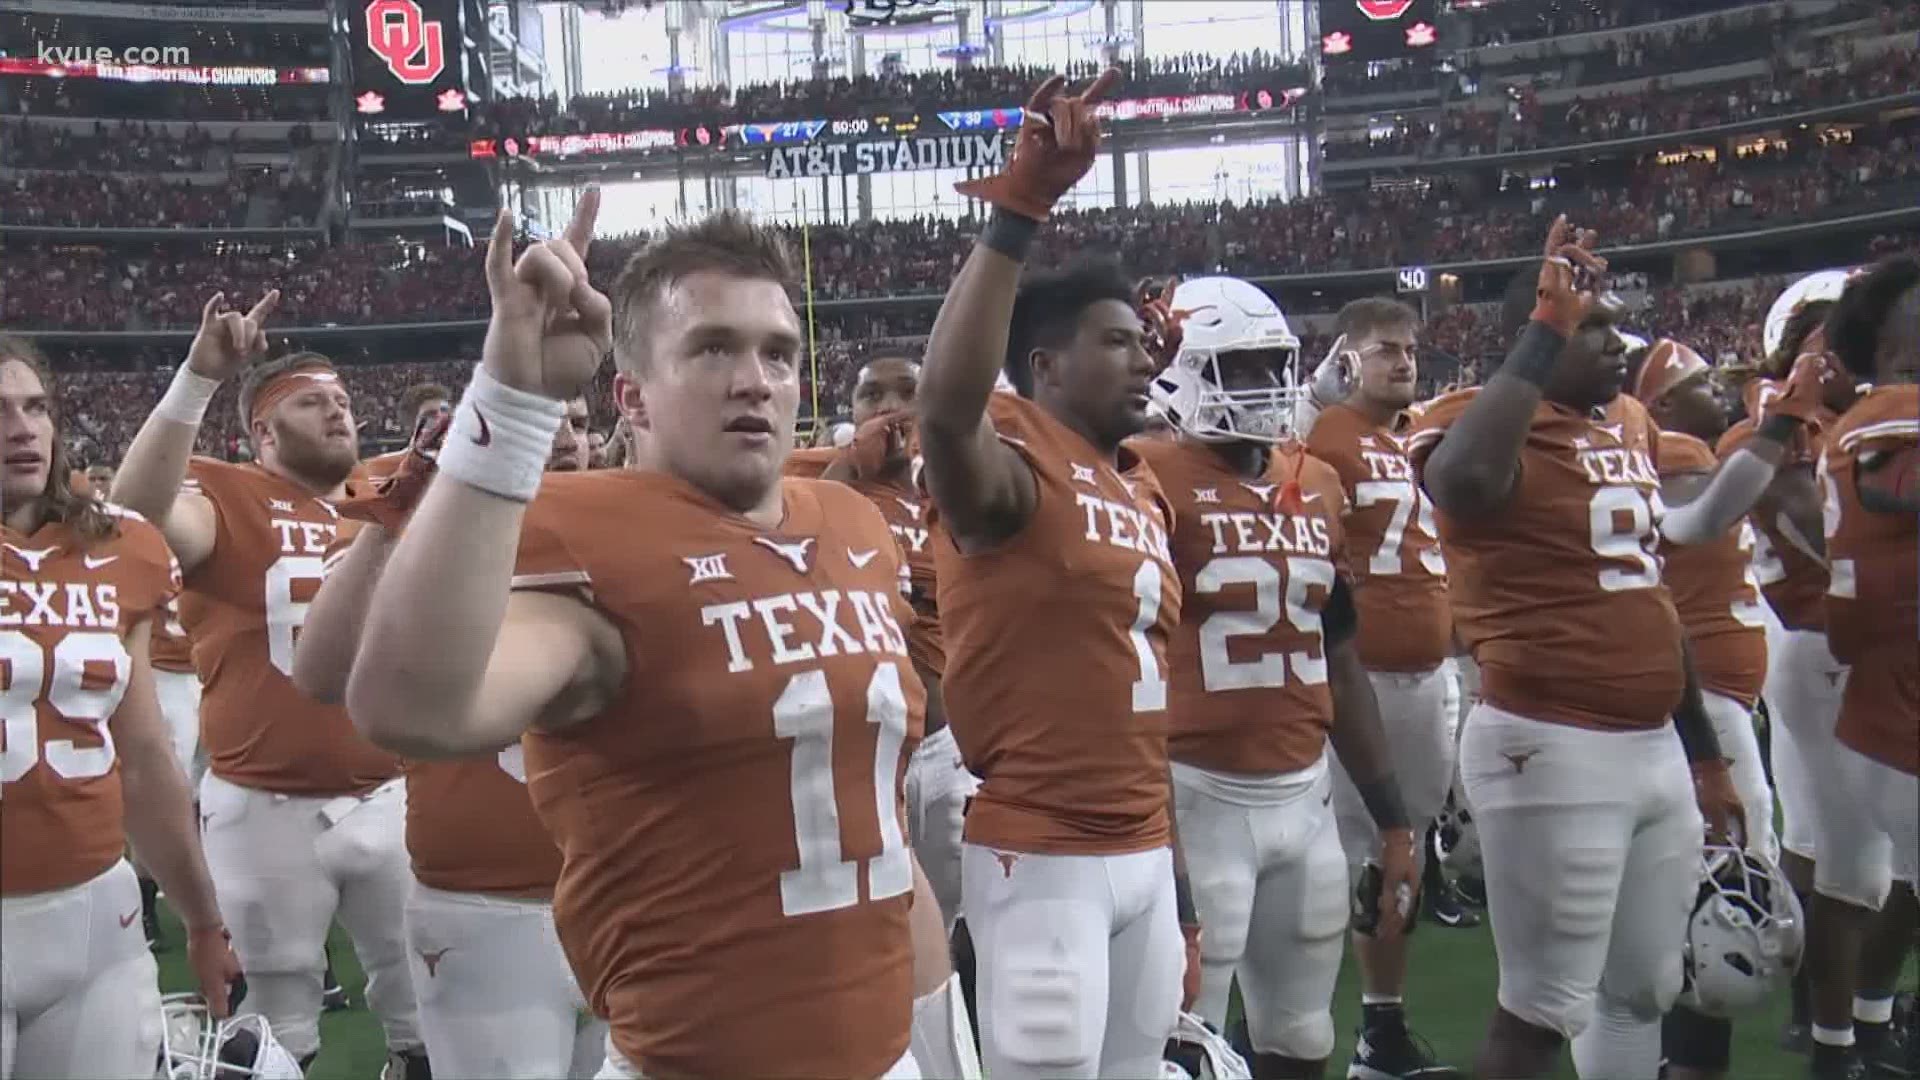 There are very mixed and extreme reactions to the University of Texas' decision to keep "The Eyes of Texas" its school song.